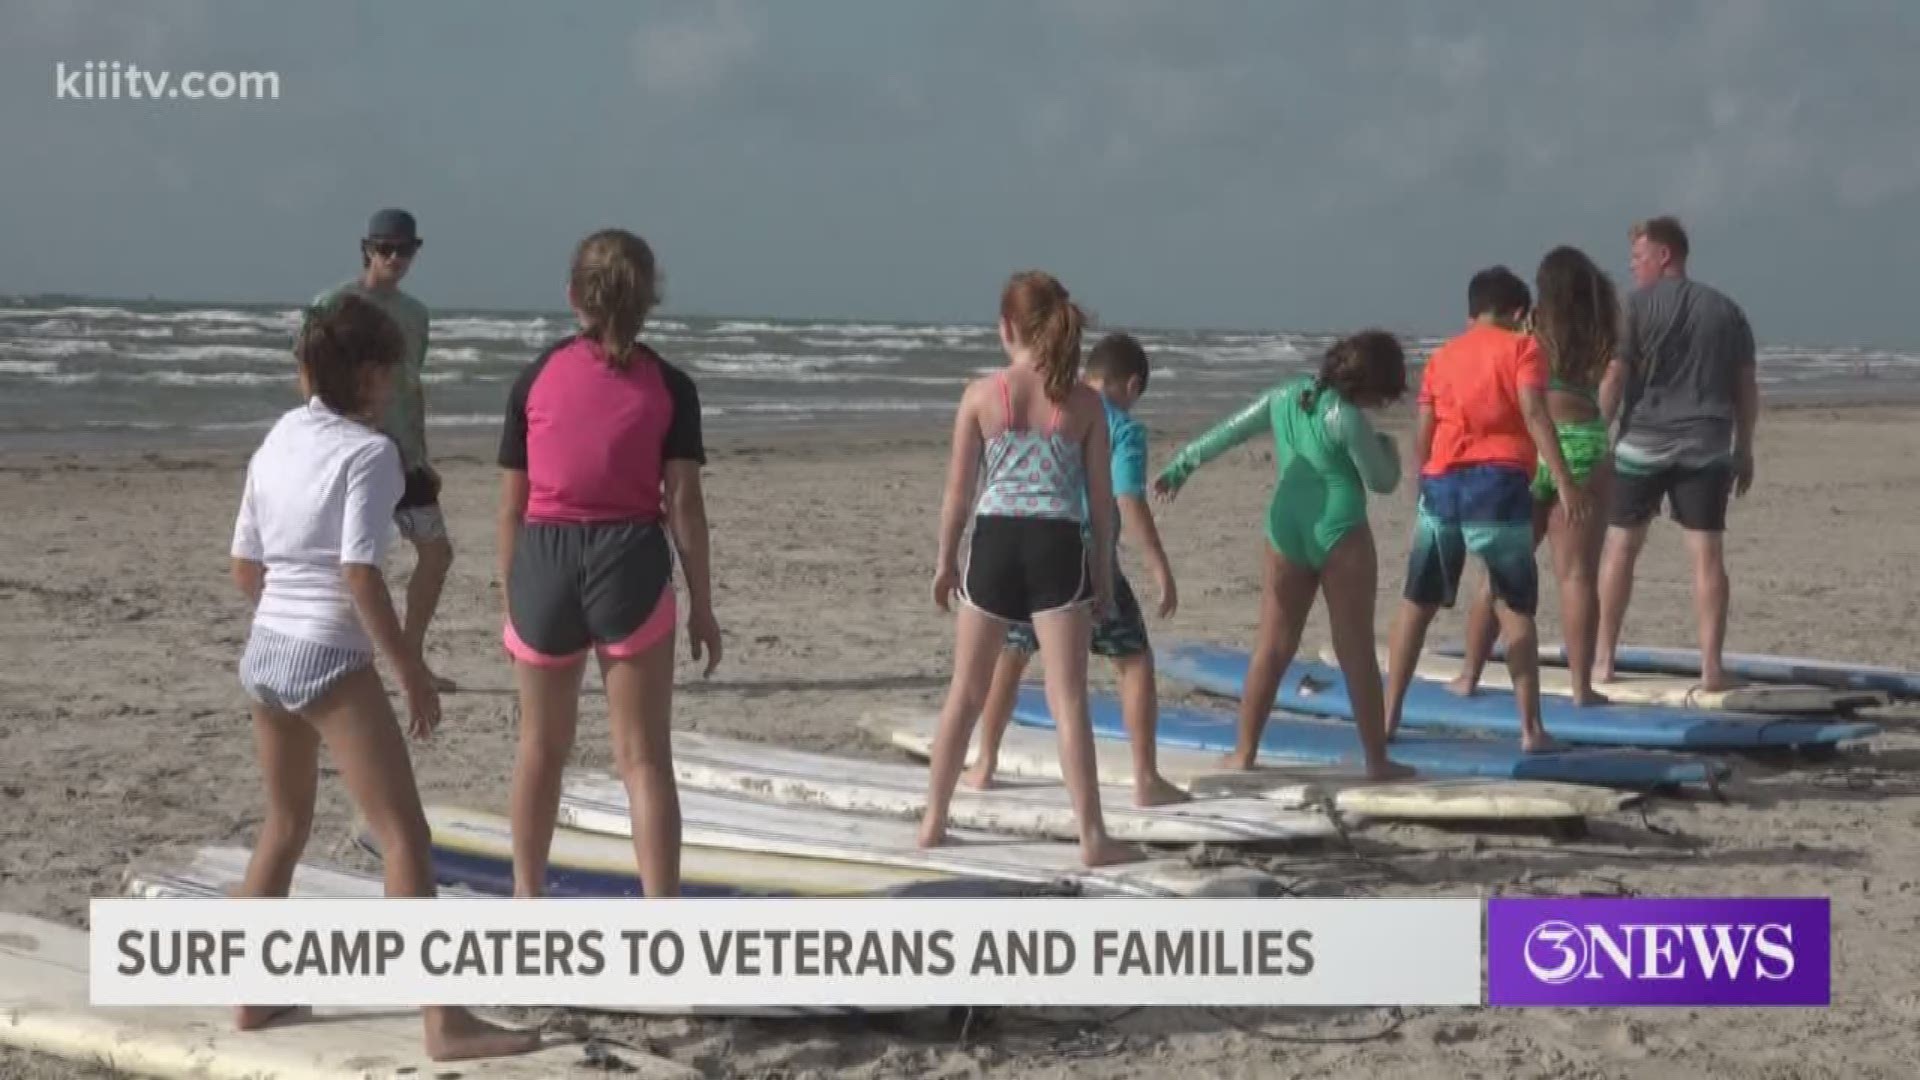 Texas Surf Camps hosted the event